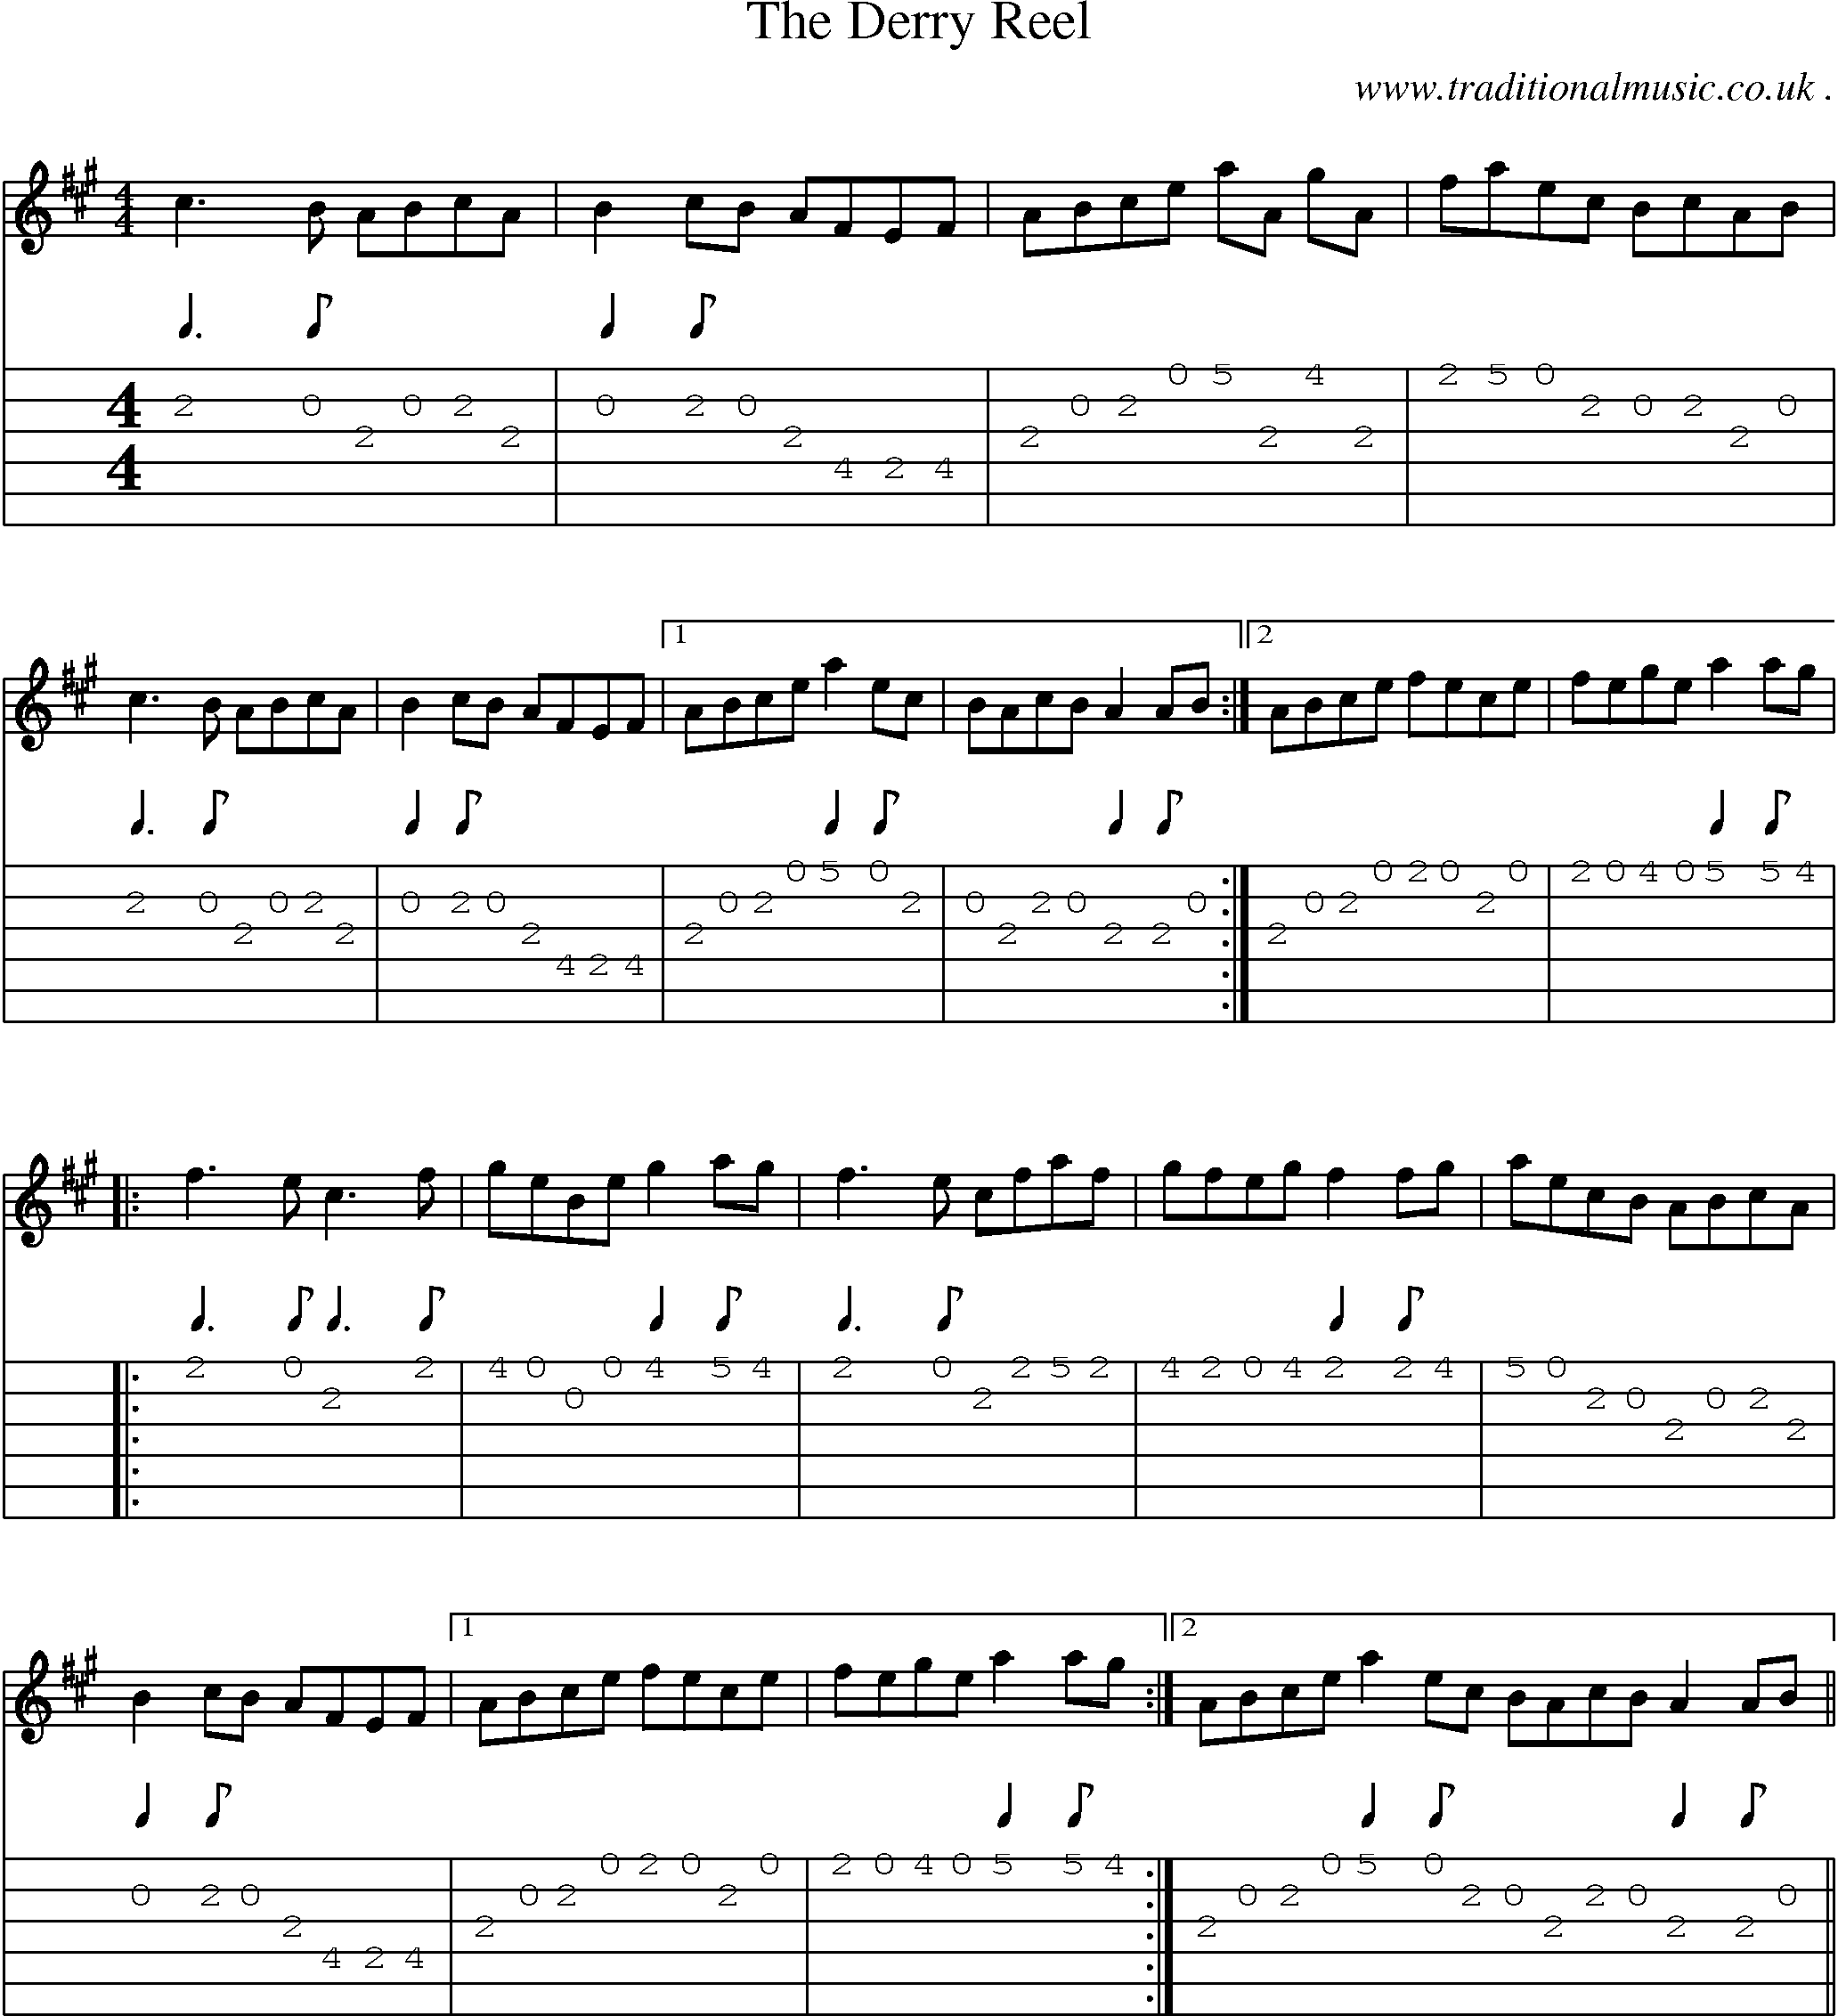 Sheet-Music and Guitar Tabs for The Derry Reel